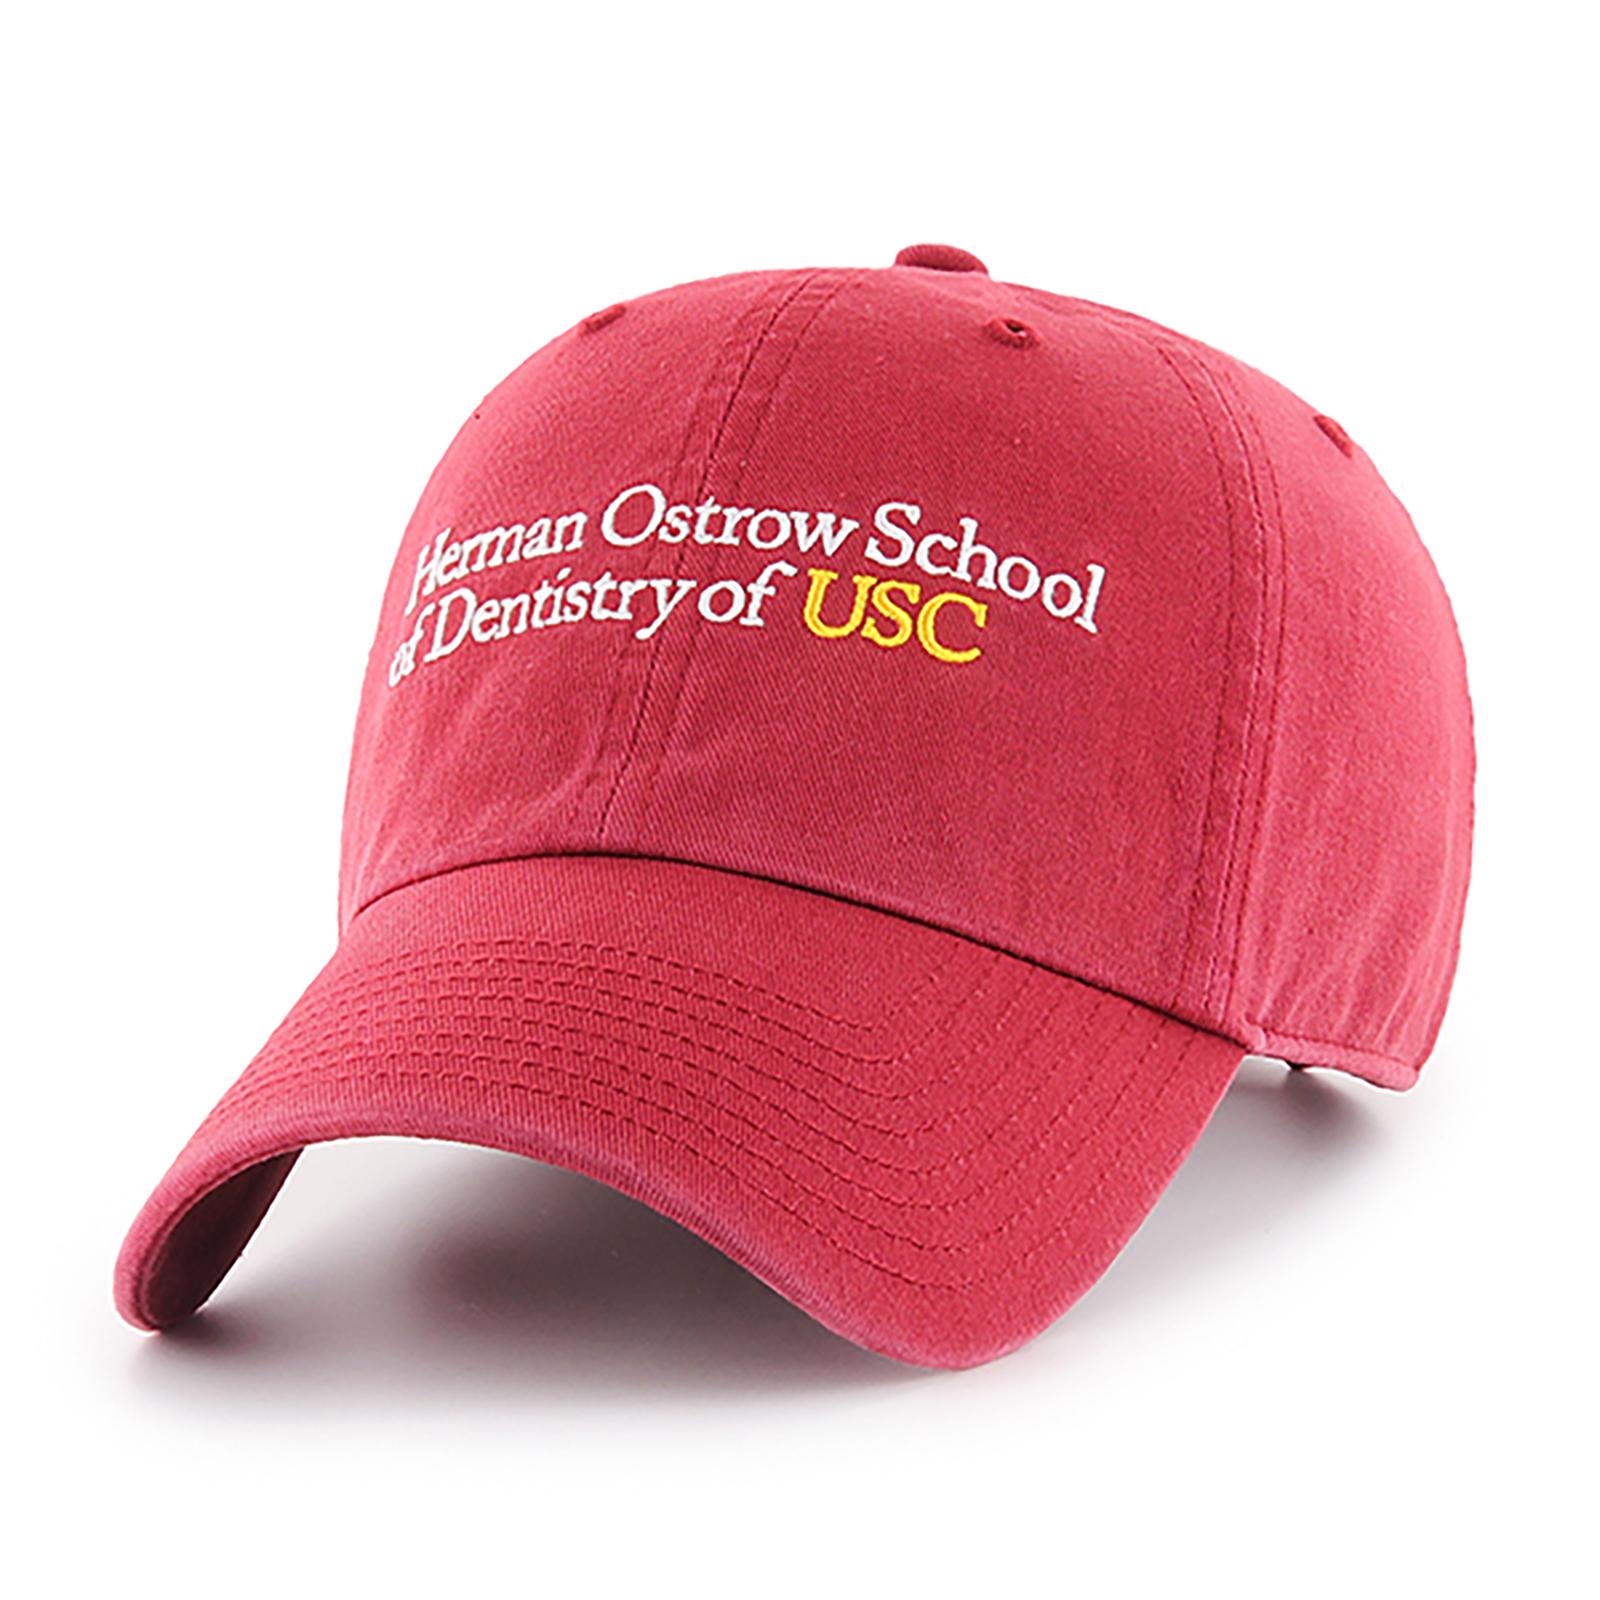 USC Herman Ostrow Dentistry School of Cap Cardinal Fits All image01